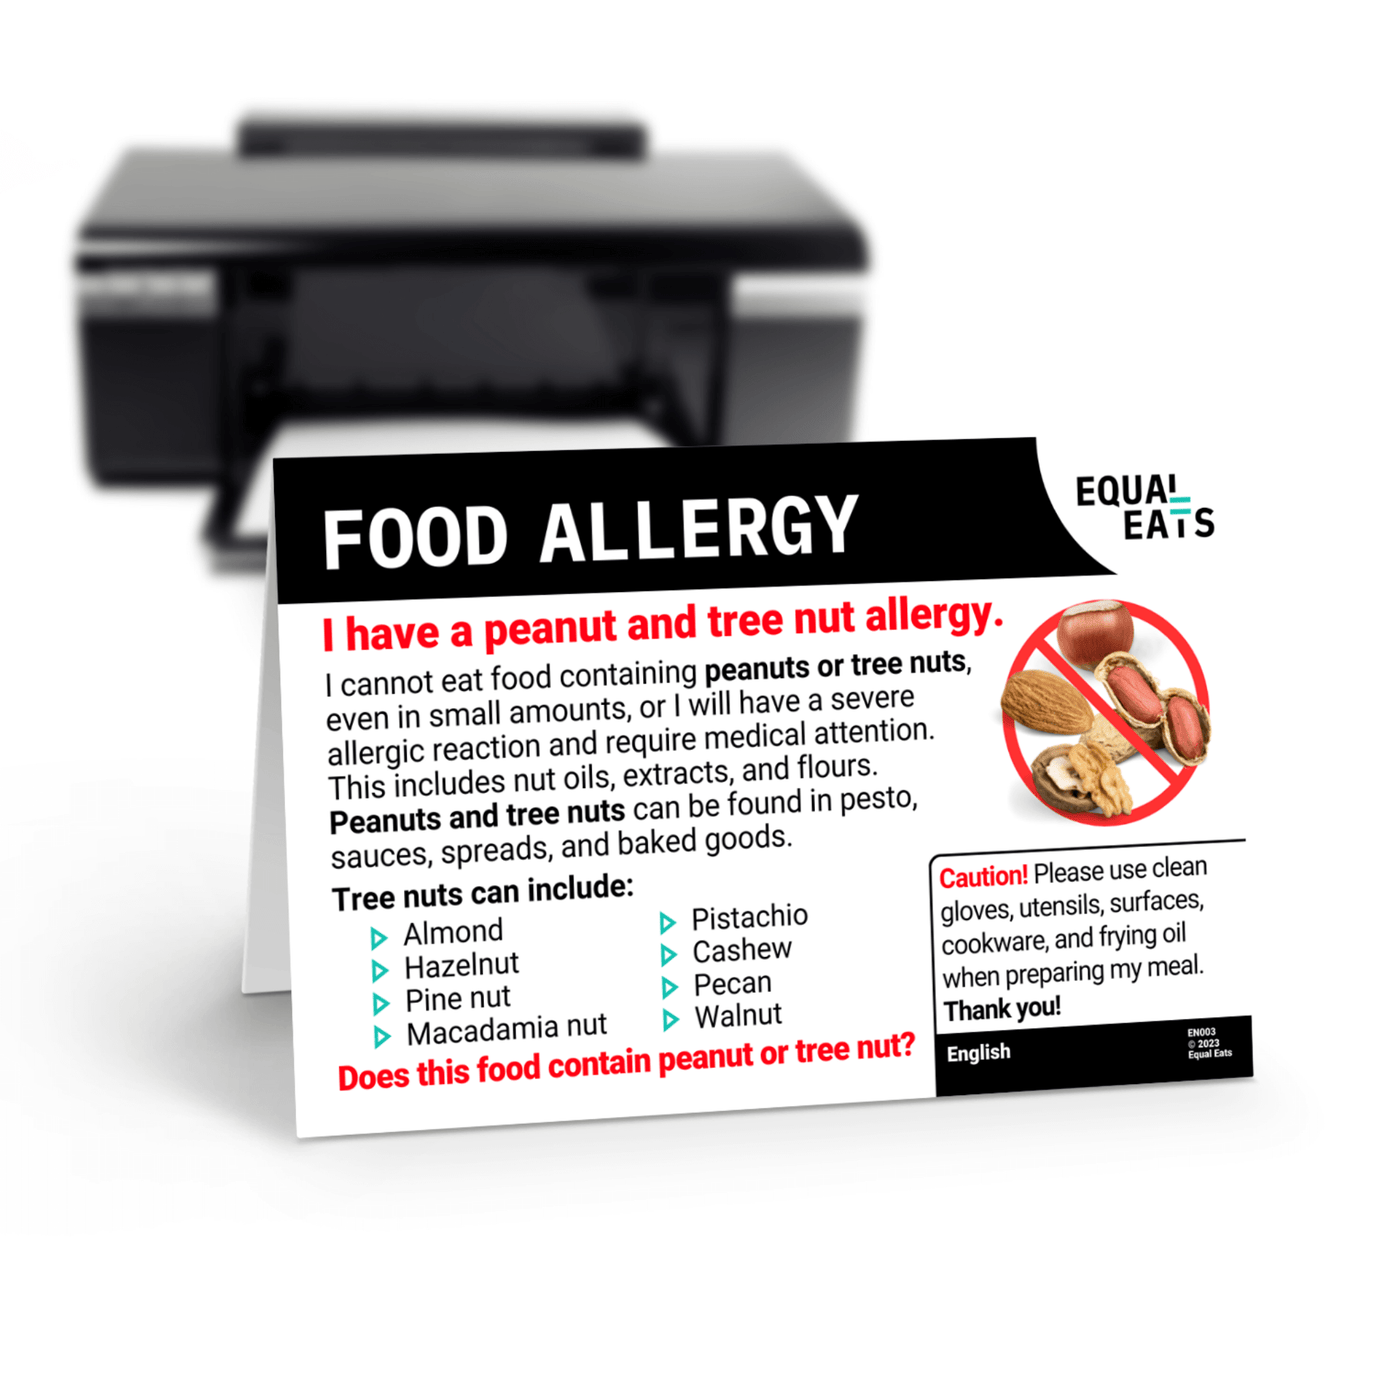 Printable Peanut and Tree Nut Allergy Card in Dutch